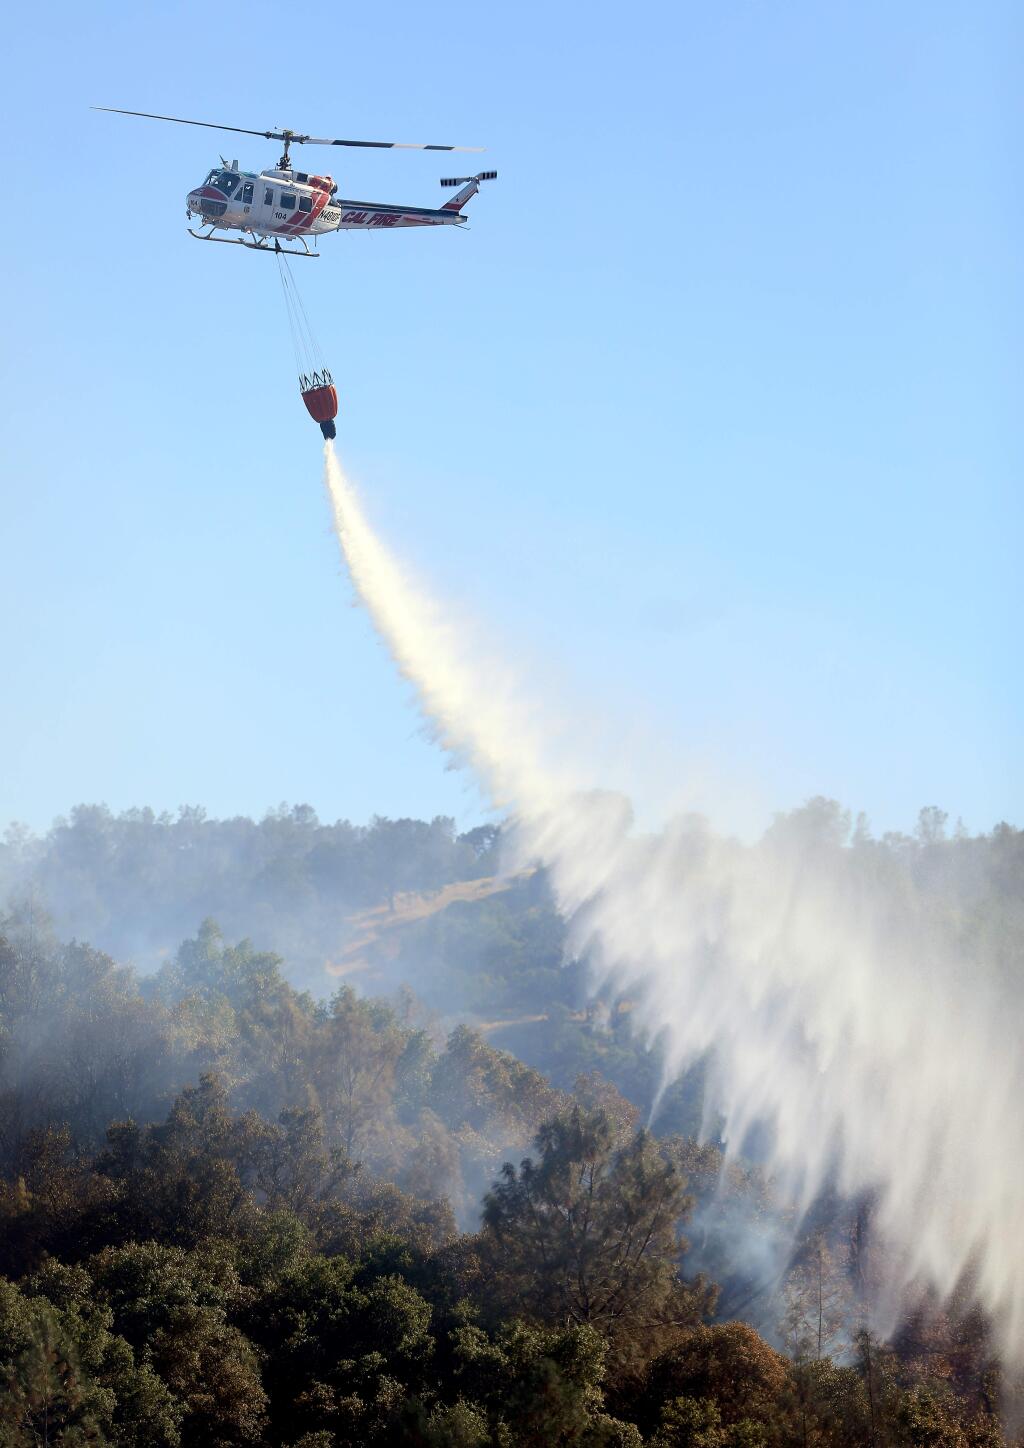 The Cal Fire helitack chopper from Boggs Mountain in Lake County, was one of two helicopters used in fighting the Canyon fire above Lake Berryessa, Monday, July 22, 2019 in Napa County. (Kent Porter / The Press Democrat) 2019